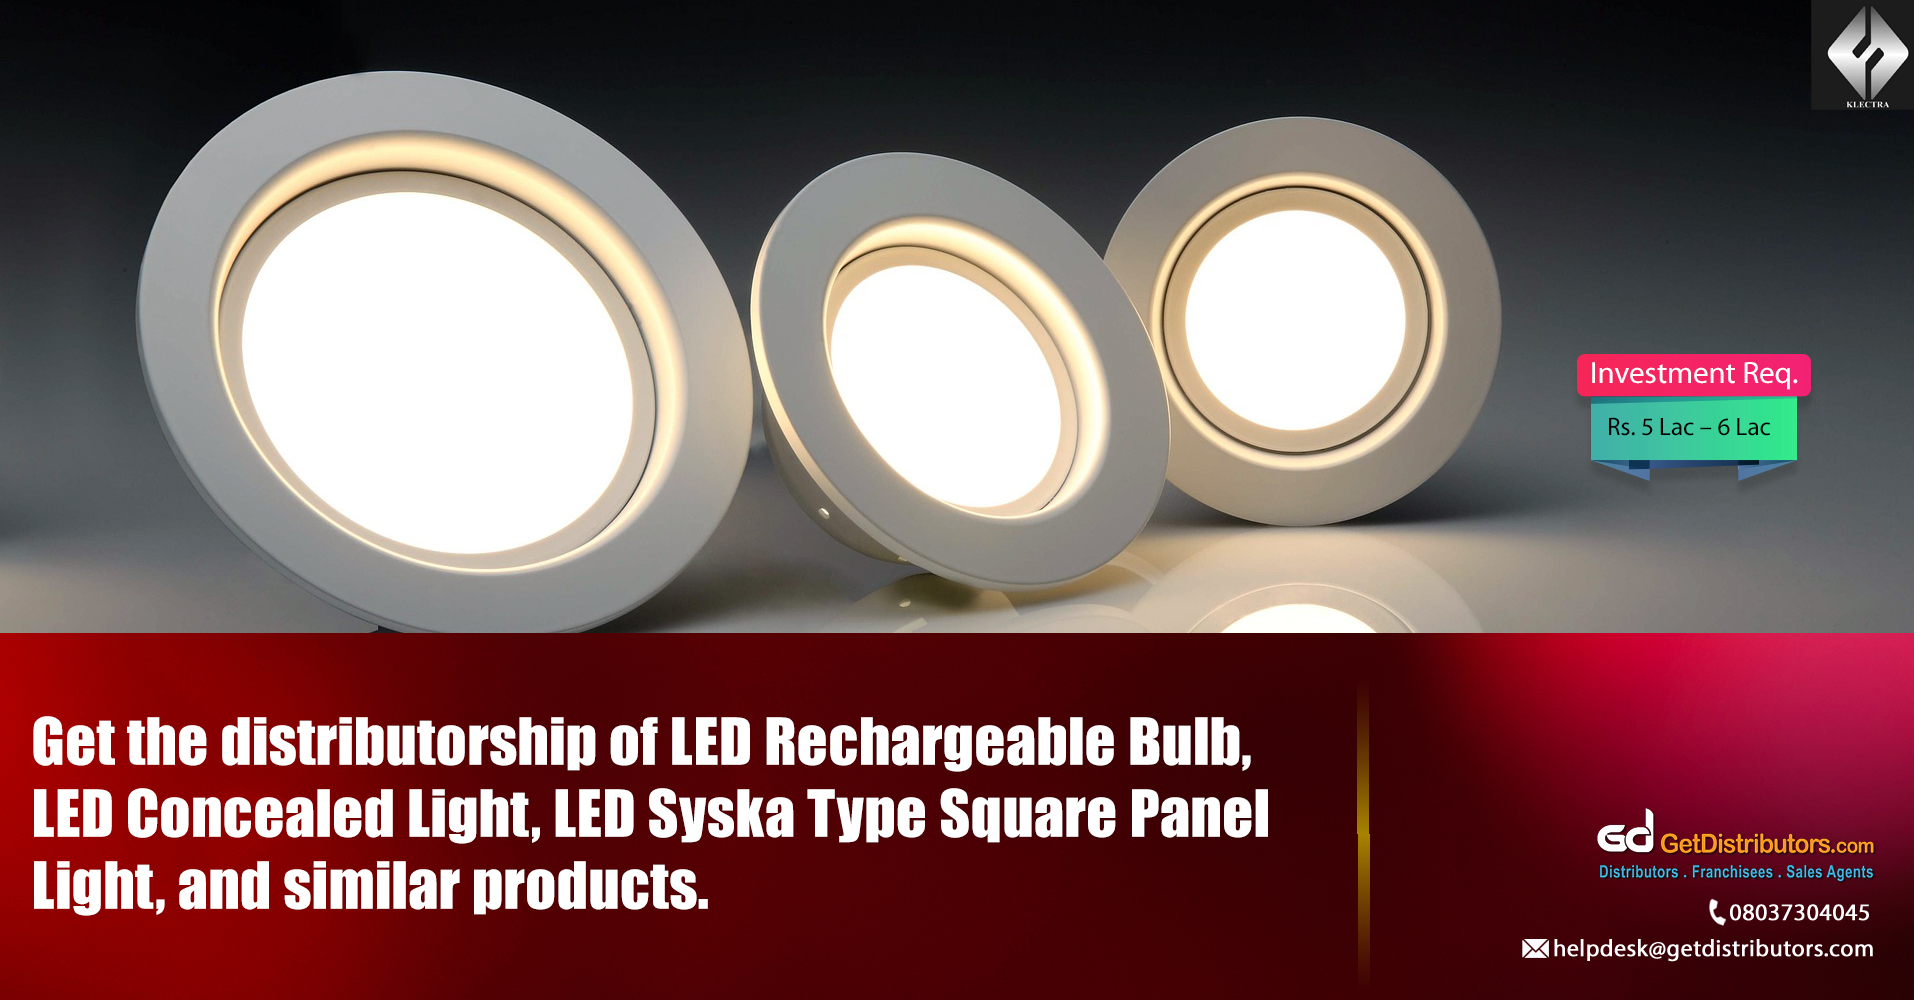 Highly efficient LED lighting products for distribution